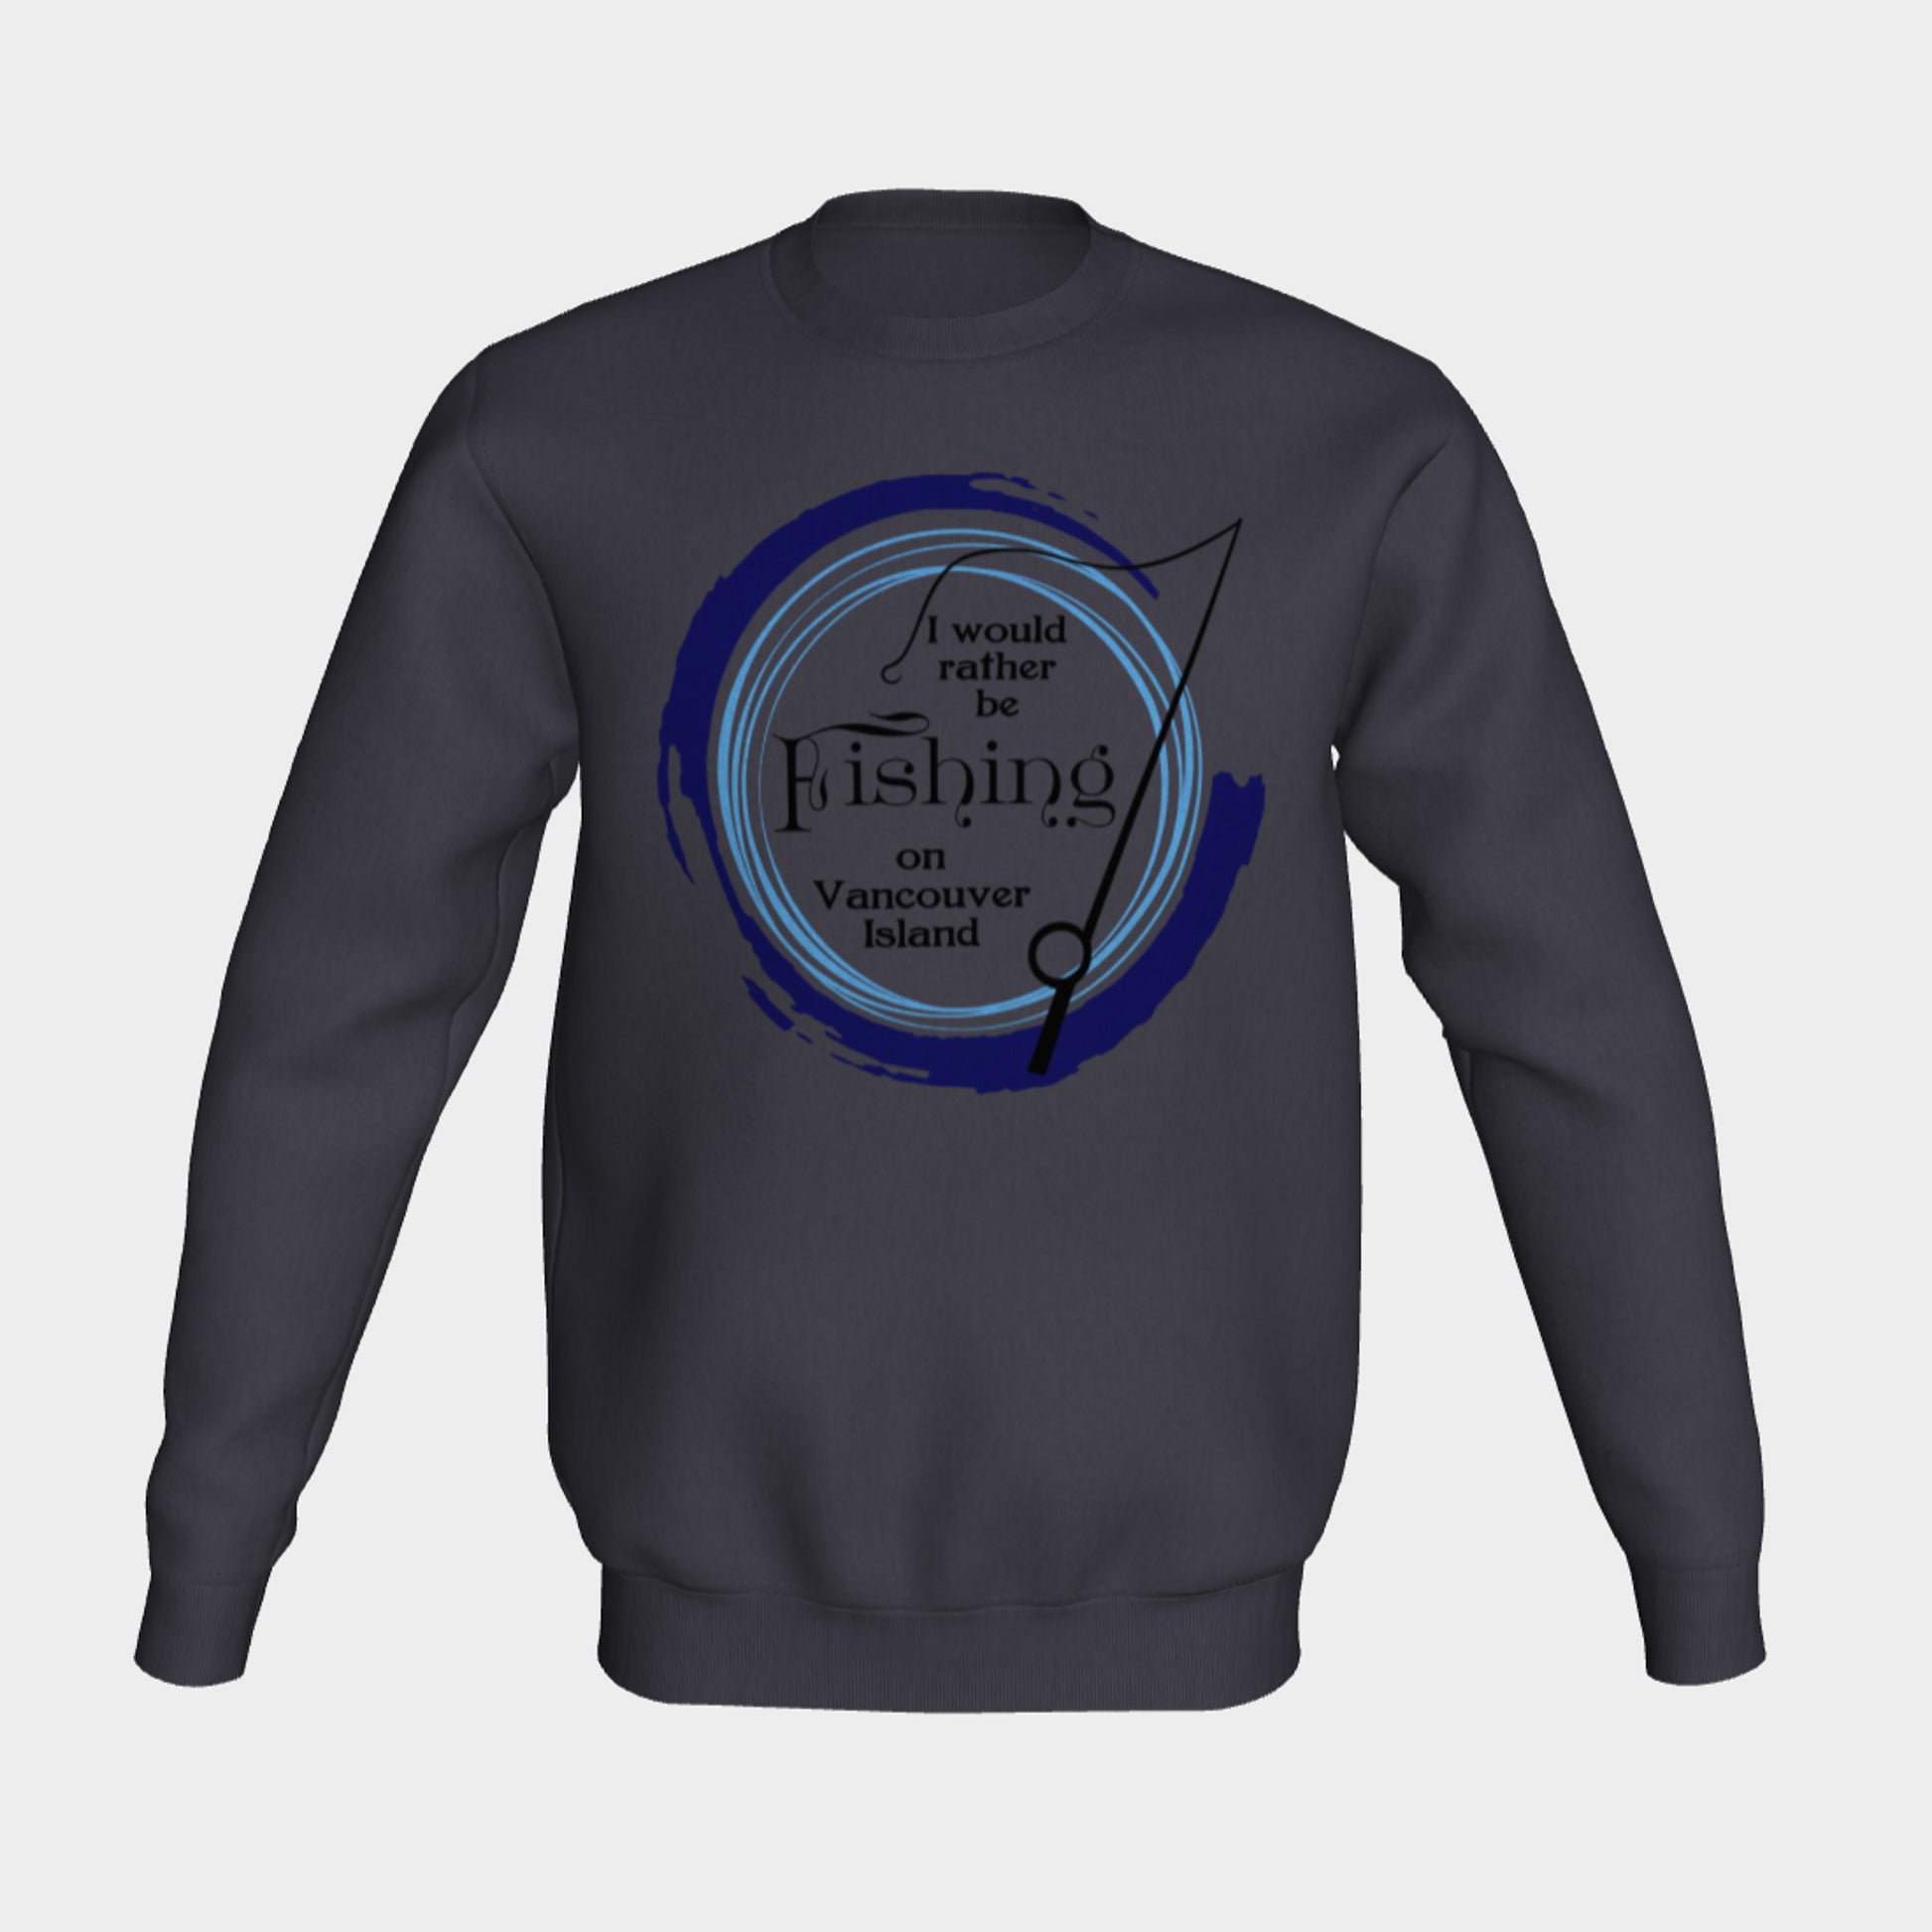 Rather Be Fishing Crewneck Sweatshirt What’s better than a super cozy sweatshirt? A super cozy sweatshirt from Van Isle Goddess!  Super cozy unisex sweatshirt for those chilly days.  Excellent for men or women.   Fit is roomy and comfortable. 